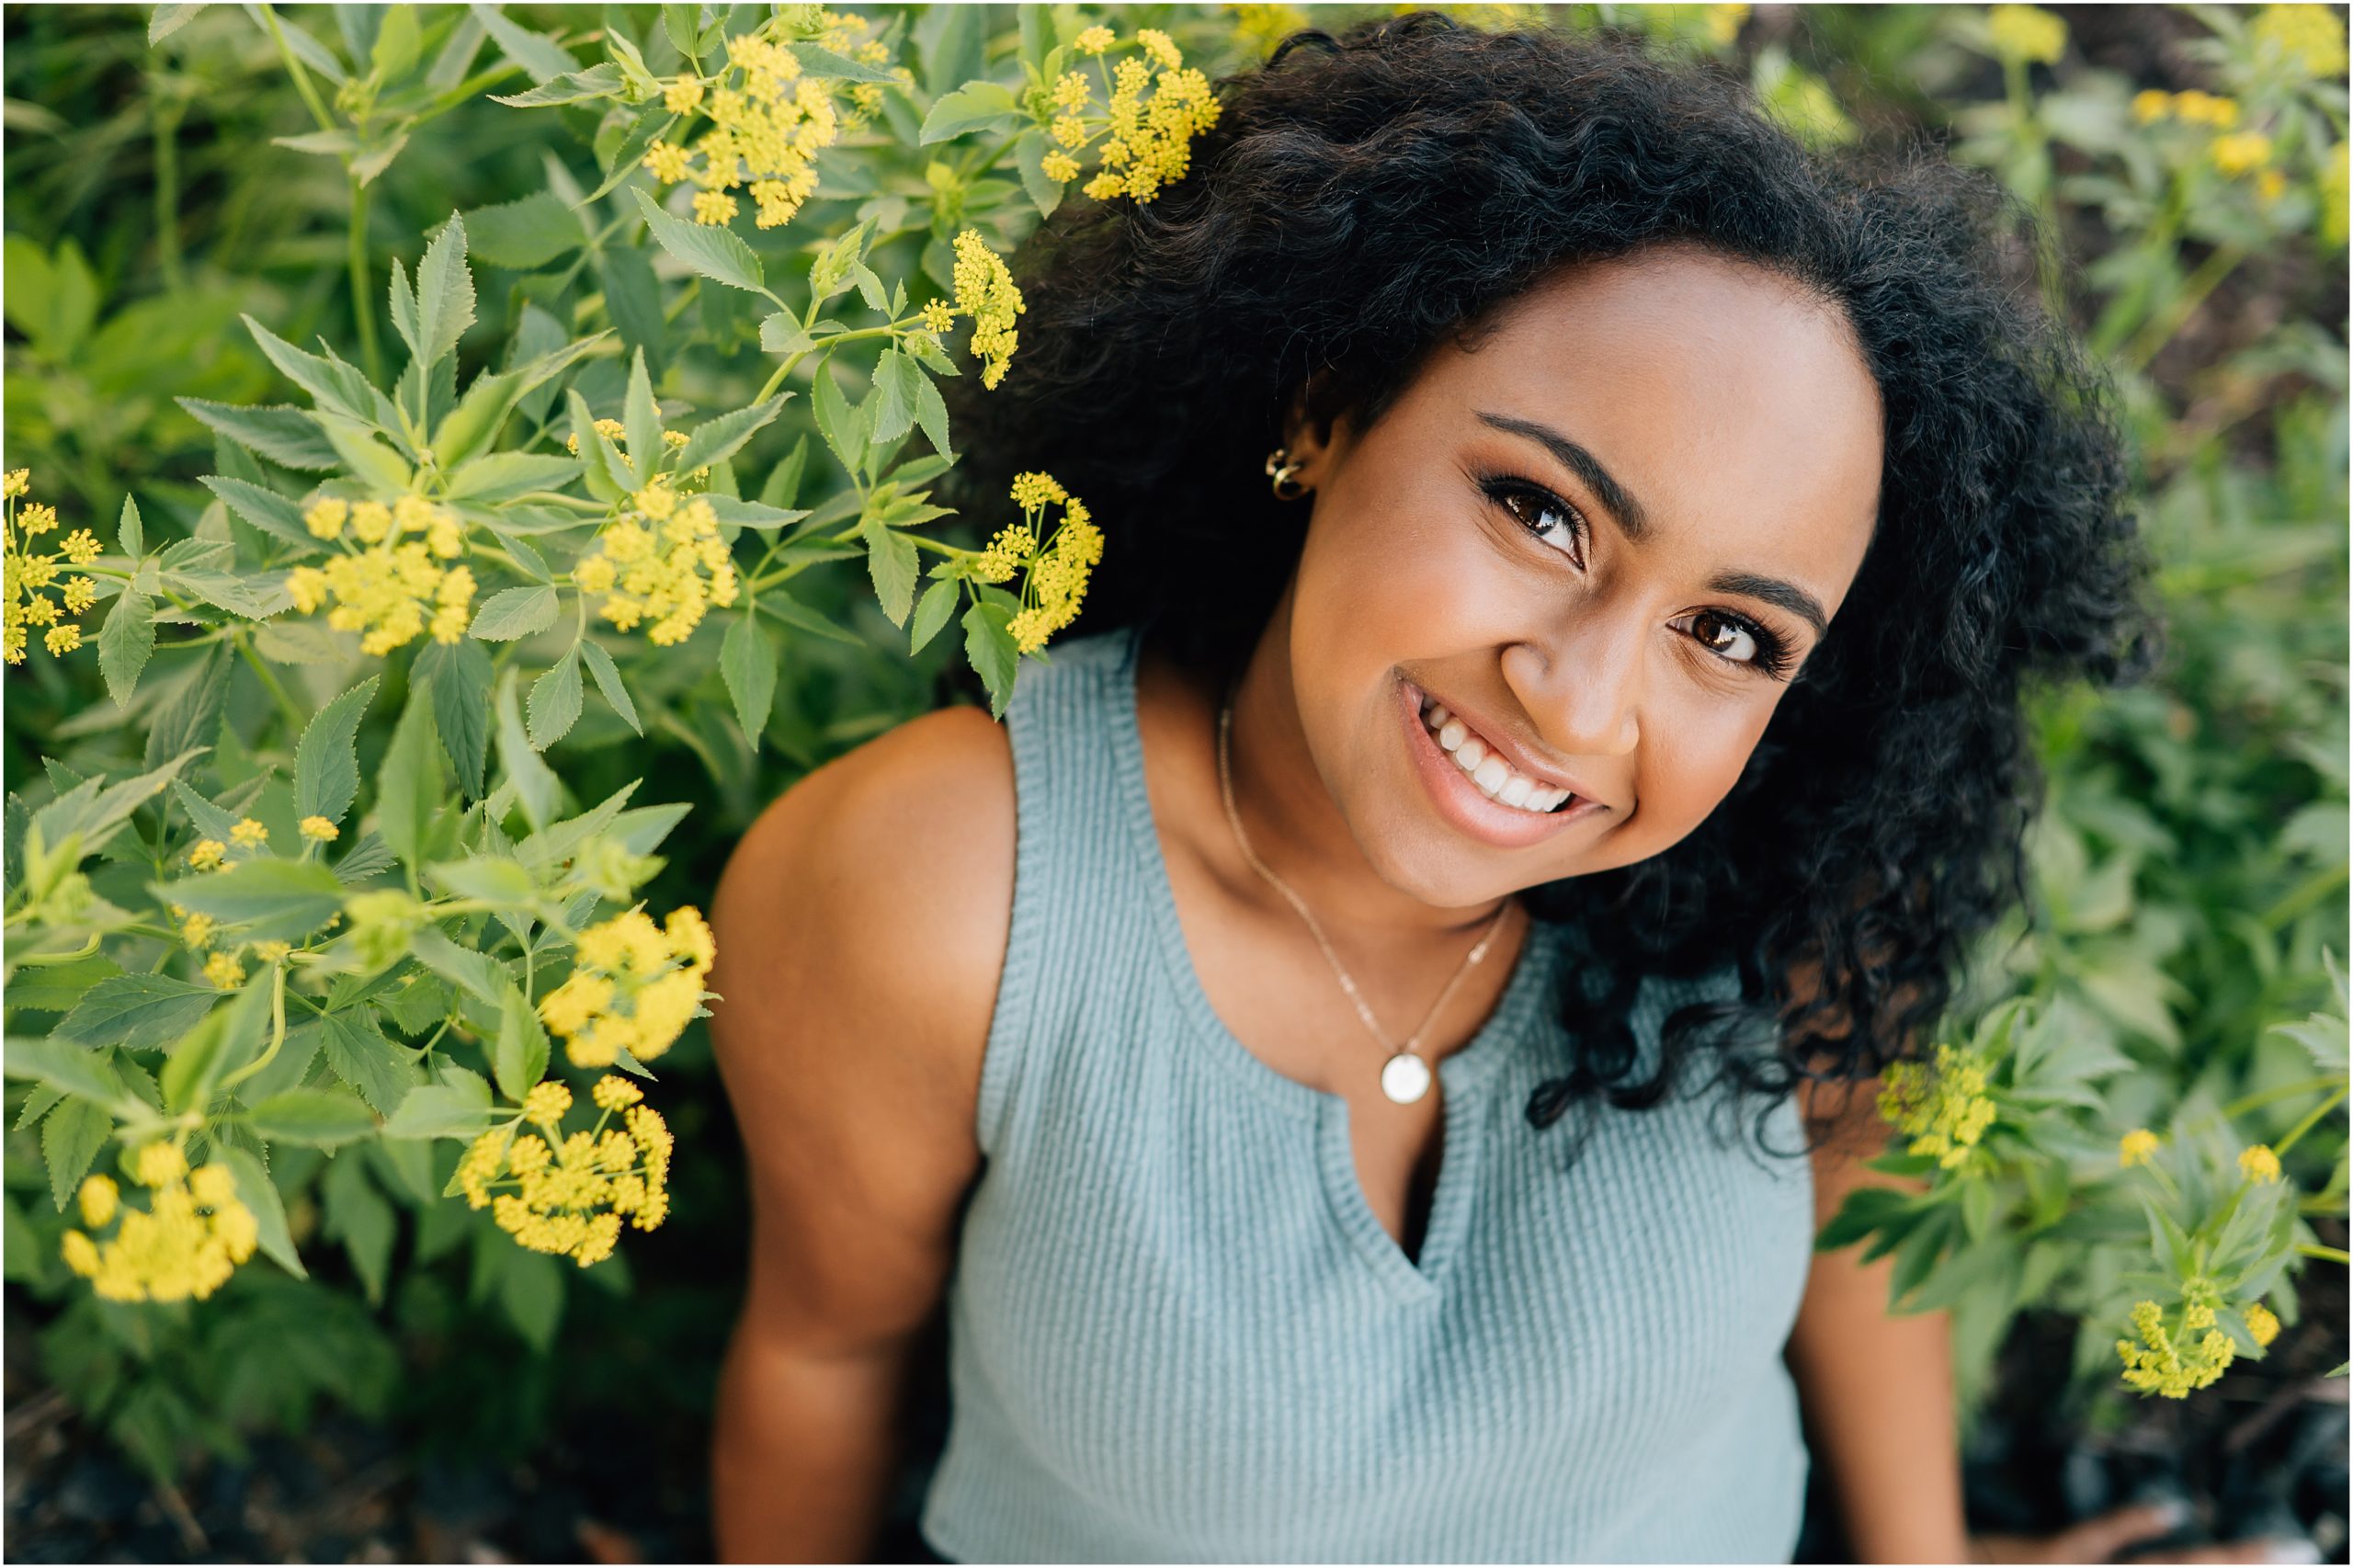 Girl with black curly hair and light blue shirt smiles up at the camera, surrounded by yellow flowers. Photo by Anna Brace who specializes in Harlan IA Photography